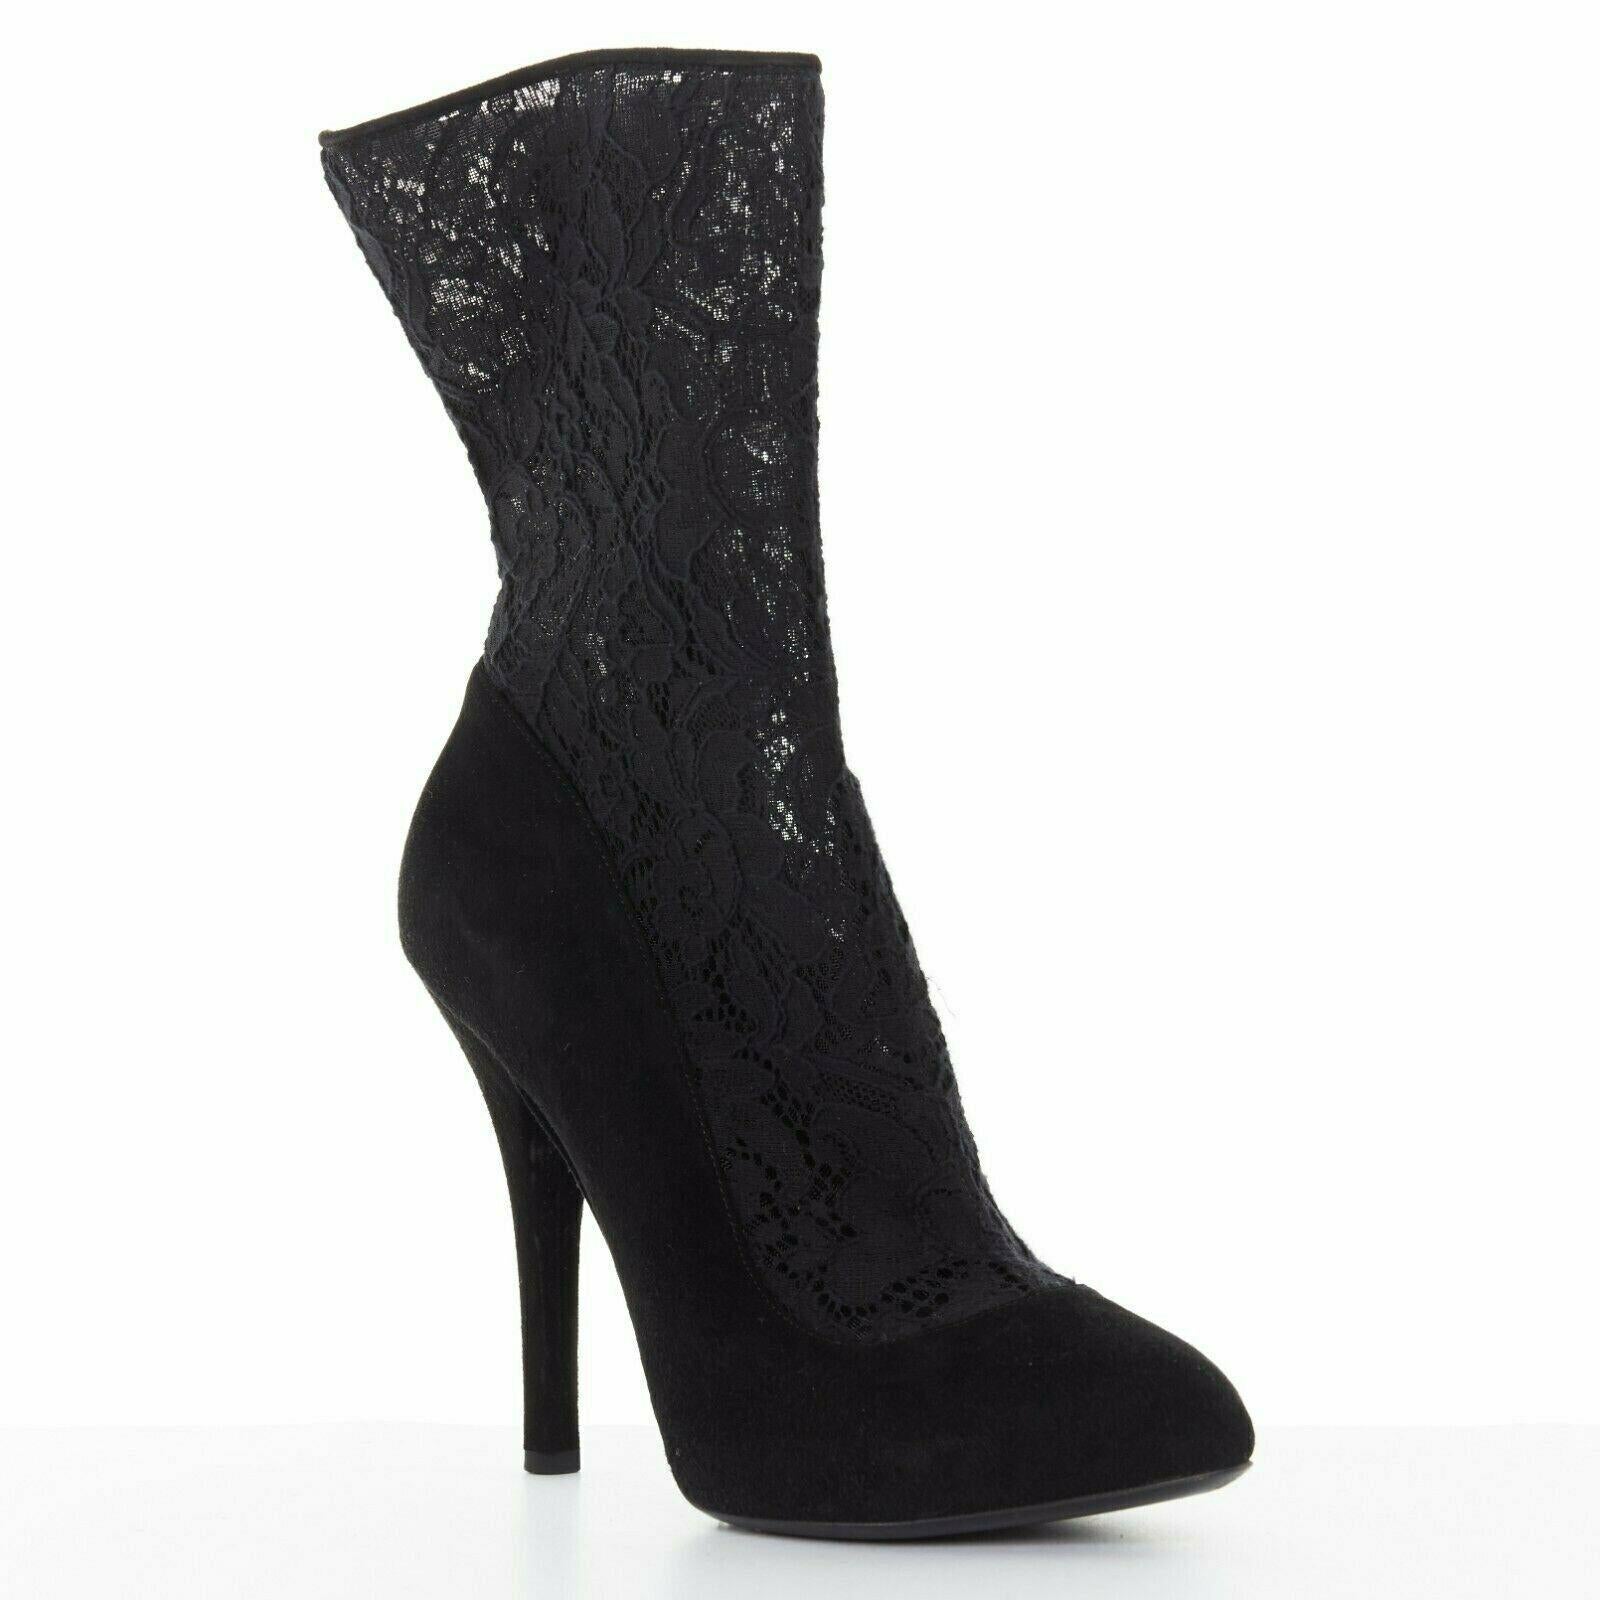 DOLCE GABBANA black floral lace mesh sock suede pump design short bootie EU39 
Reference: JECN/A00003 
Brand: Dolce Gabbana 
Designer: Domenico Dolce and Stefano Gabbana 
Material: Suede 
Color: Black 
Pattern: Other 
Closure: Zip Extra Detail: